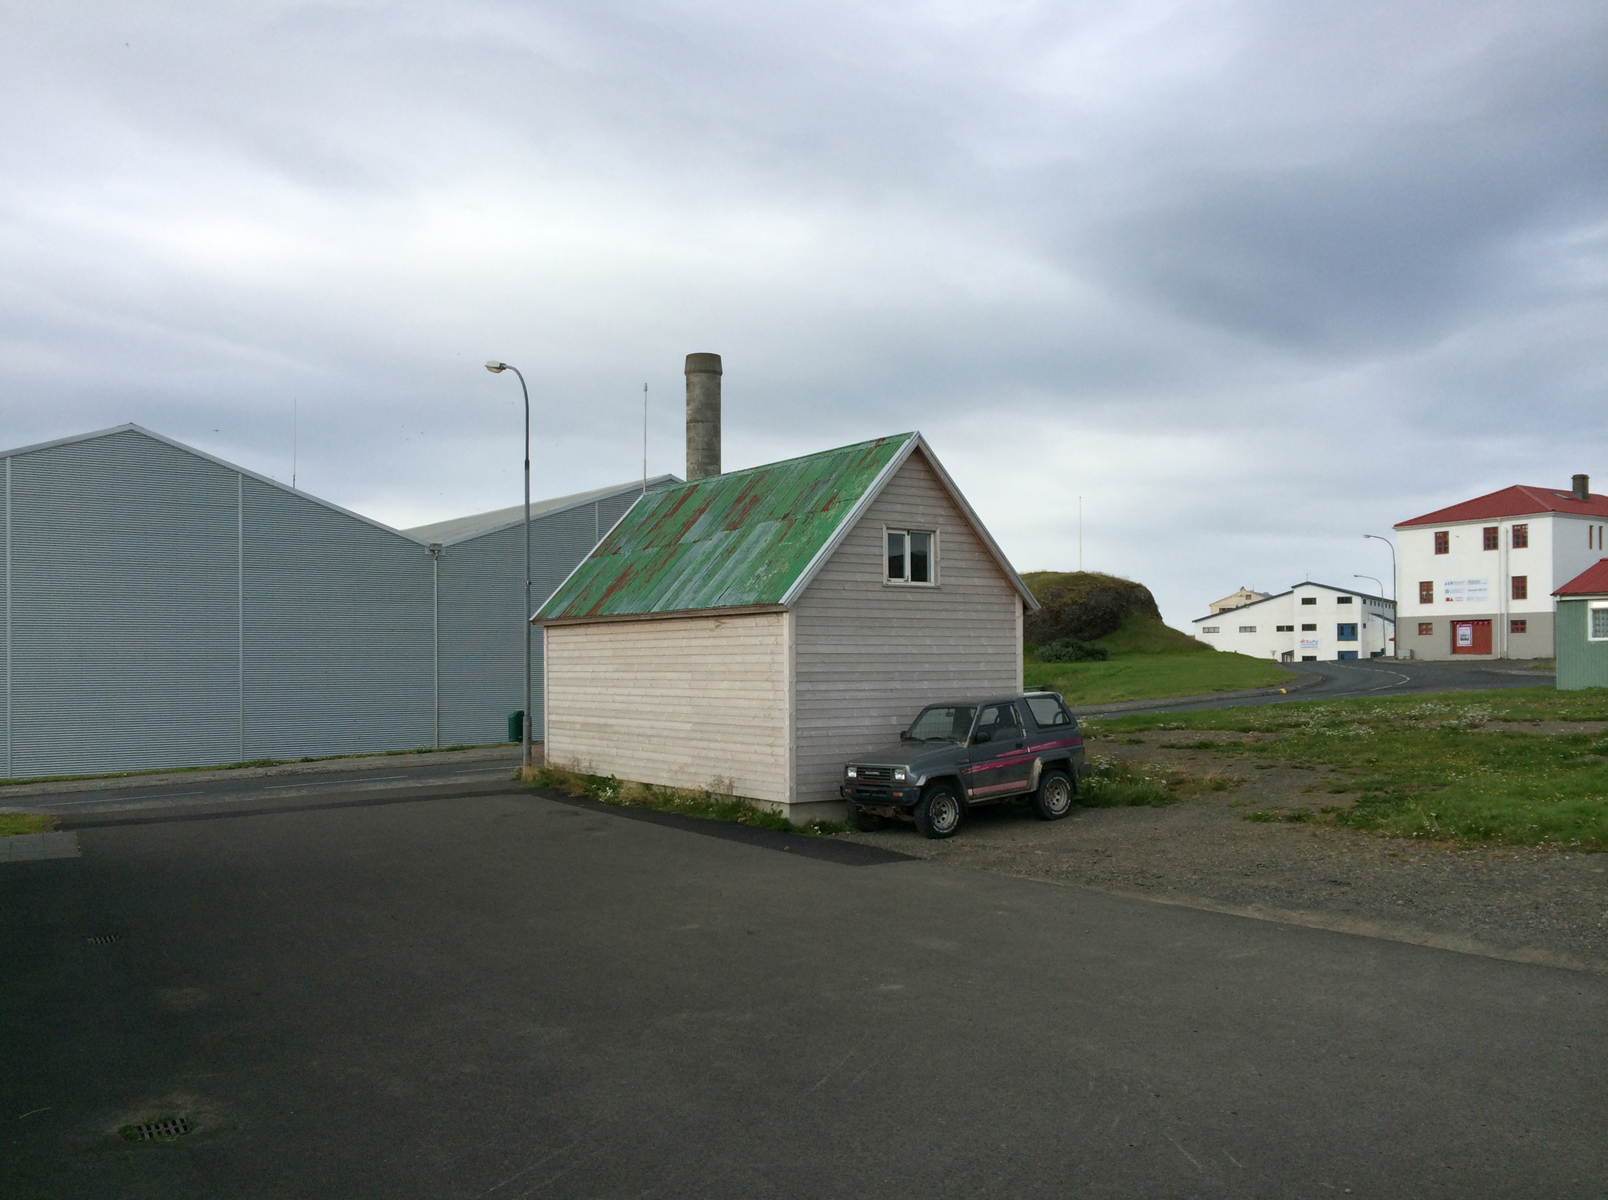 In expanse of asphalt and grey sky, a small building with a green metal roof.